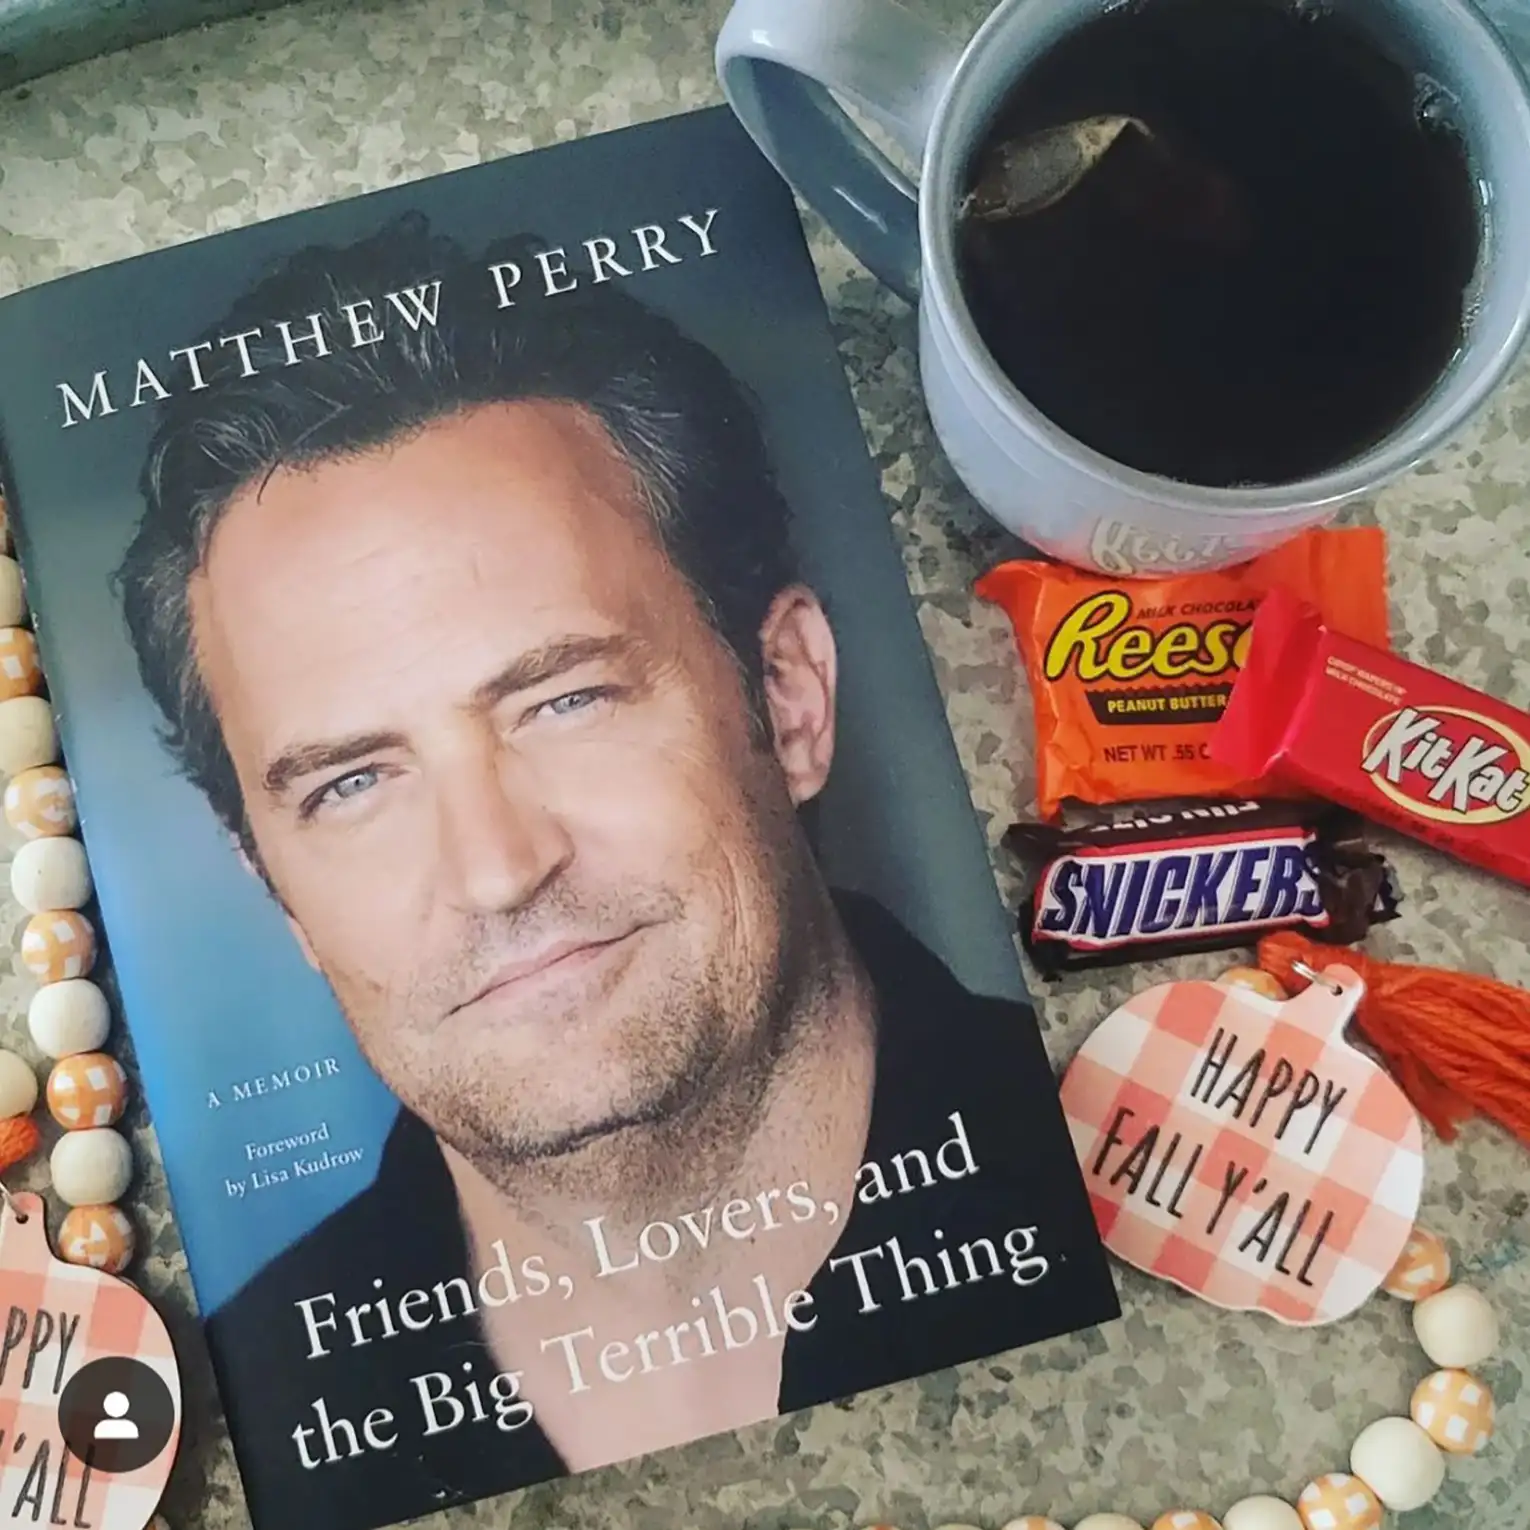 Matthew Perry: Friends, Lovers, and the Big Terrible Thing